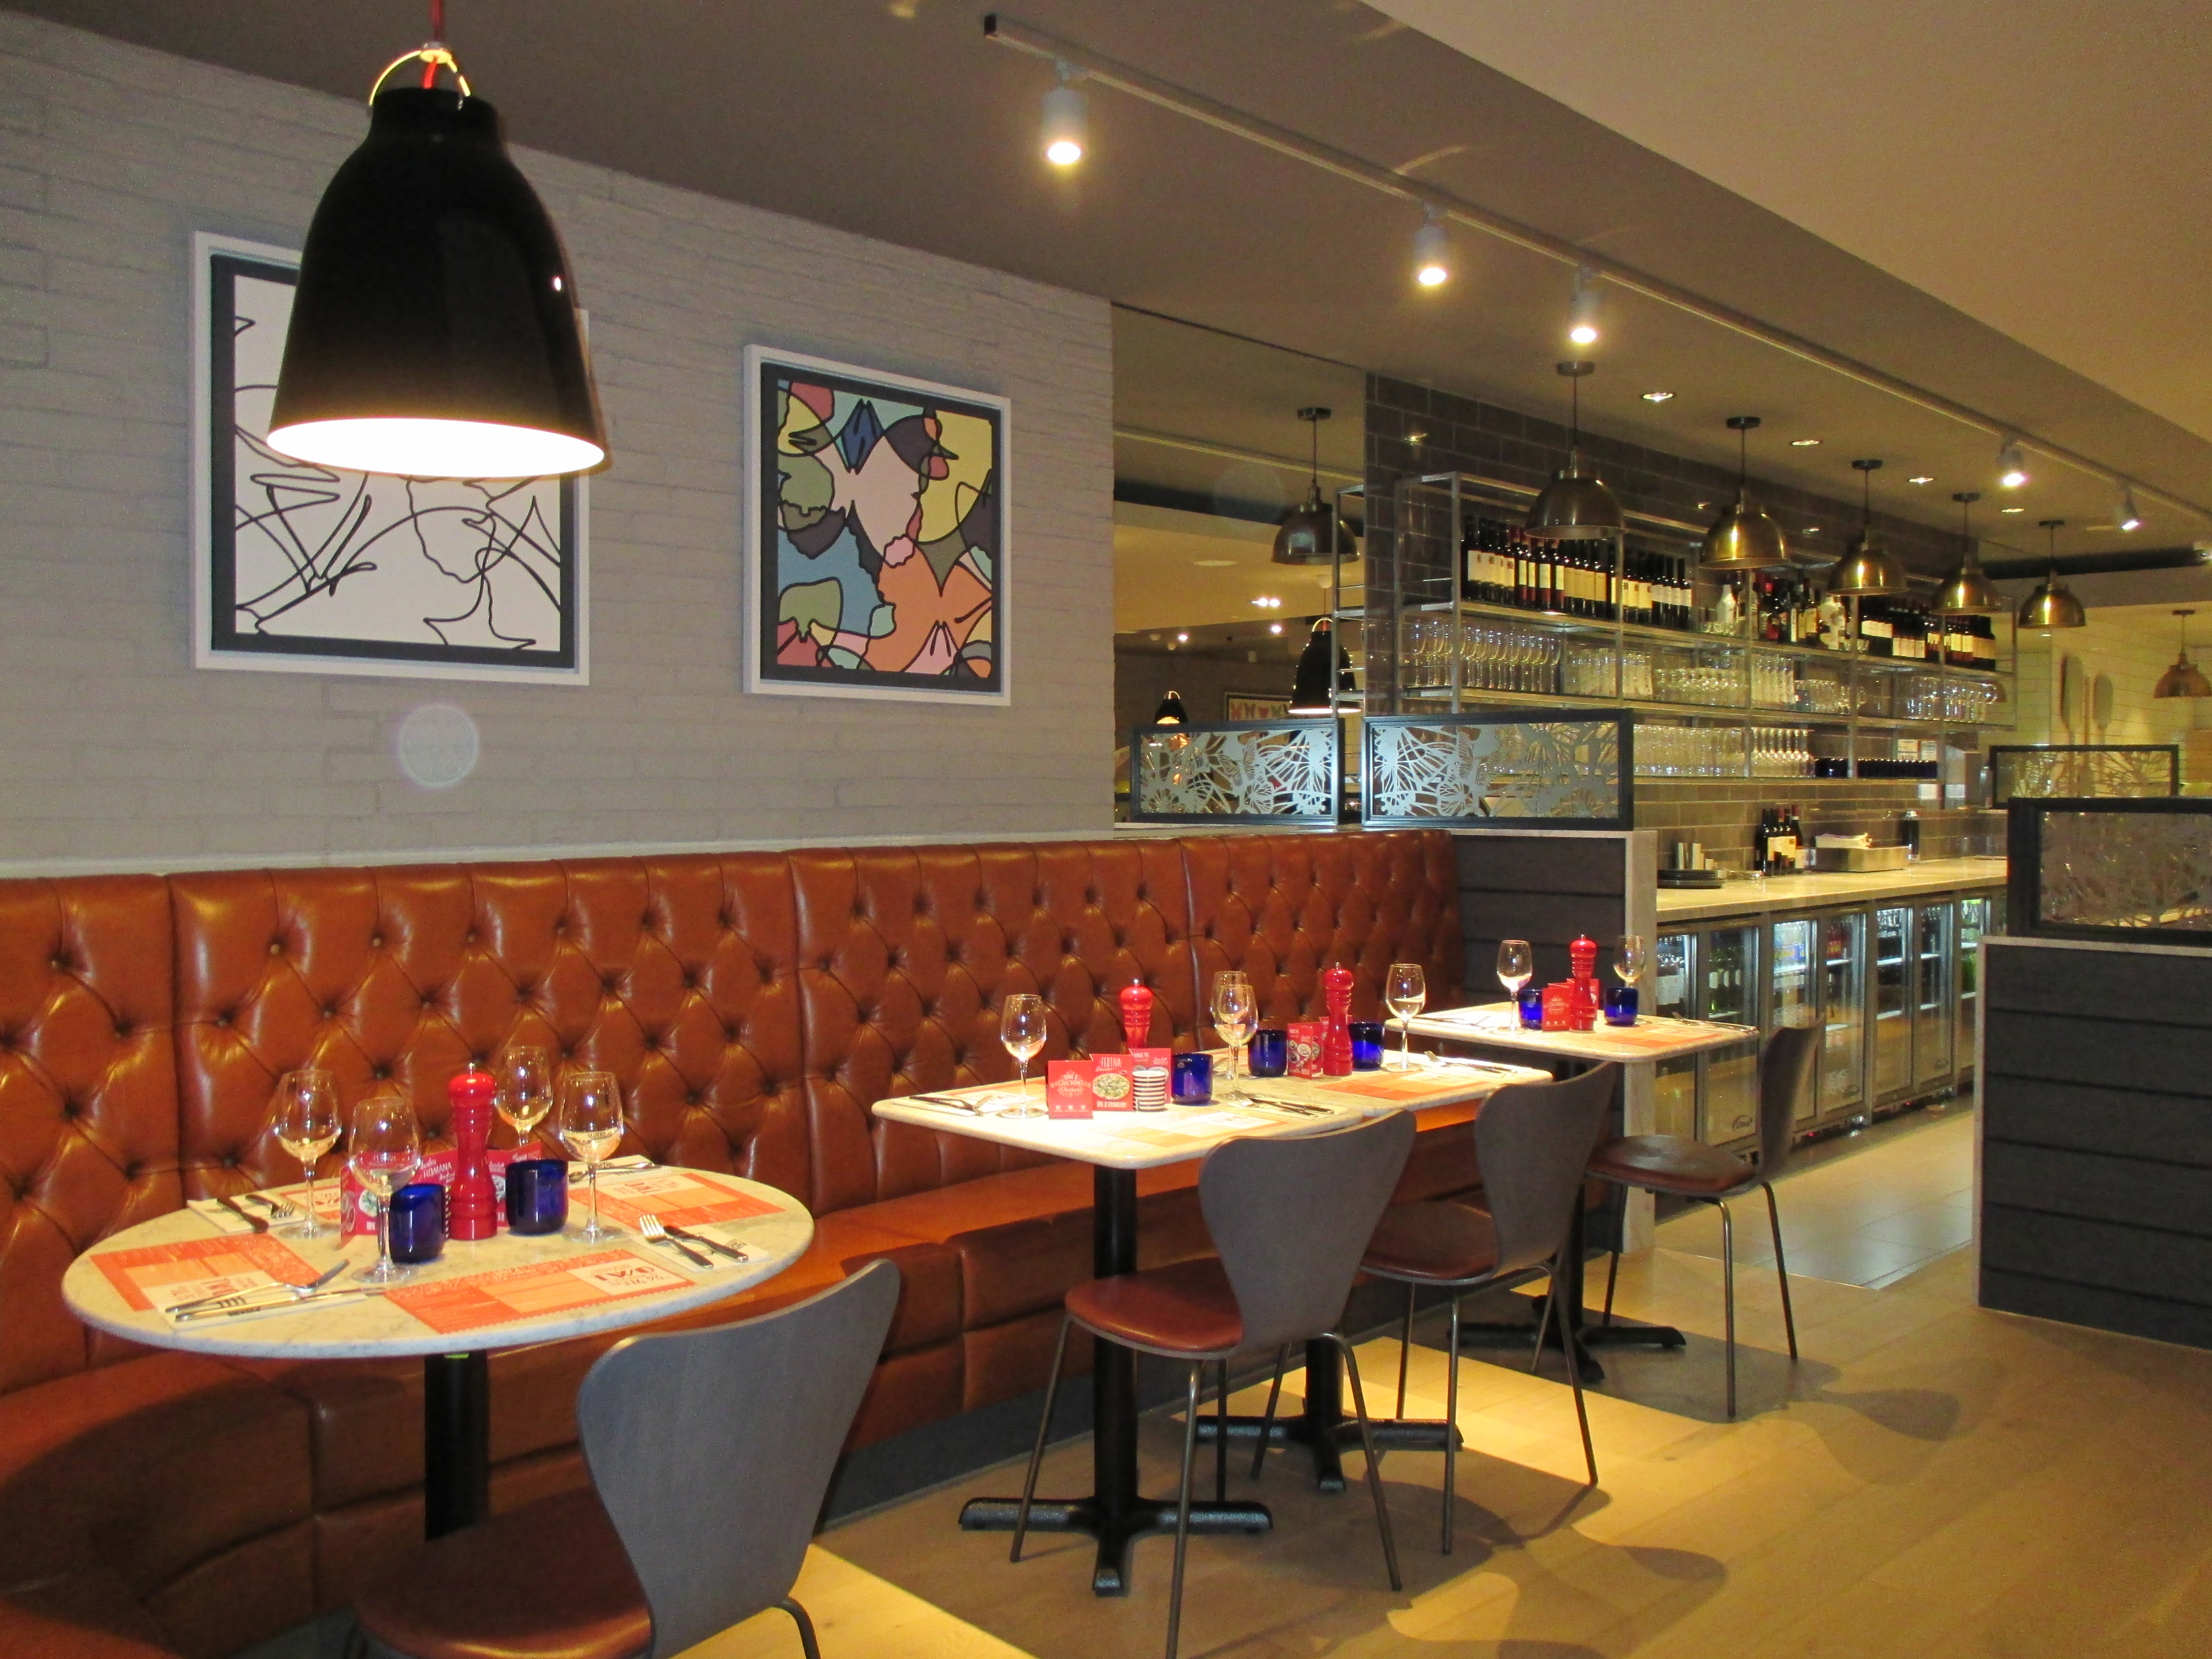 Pizza Express Epping 01992 577000